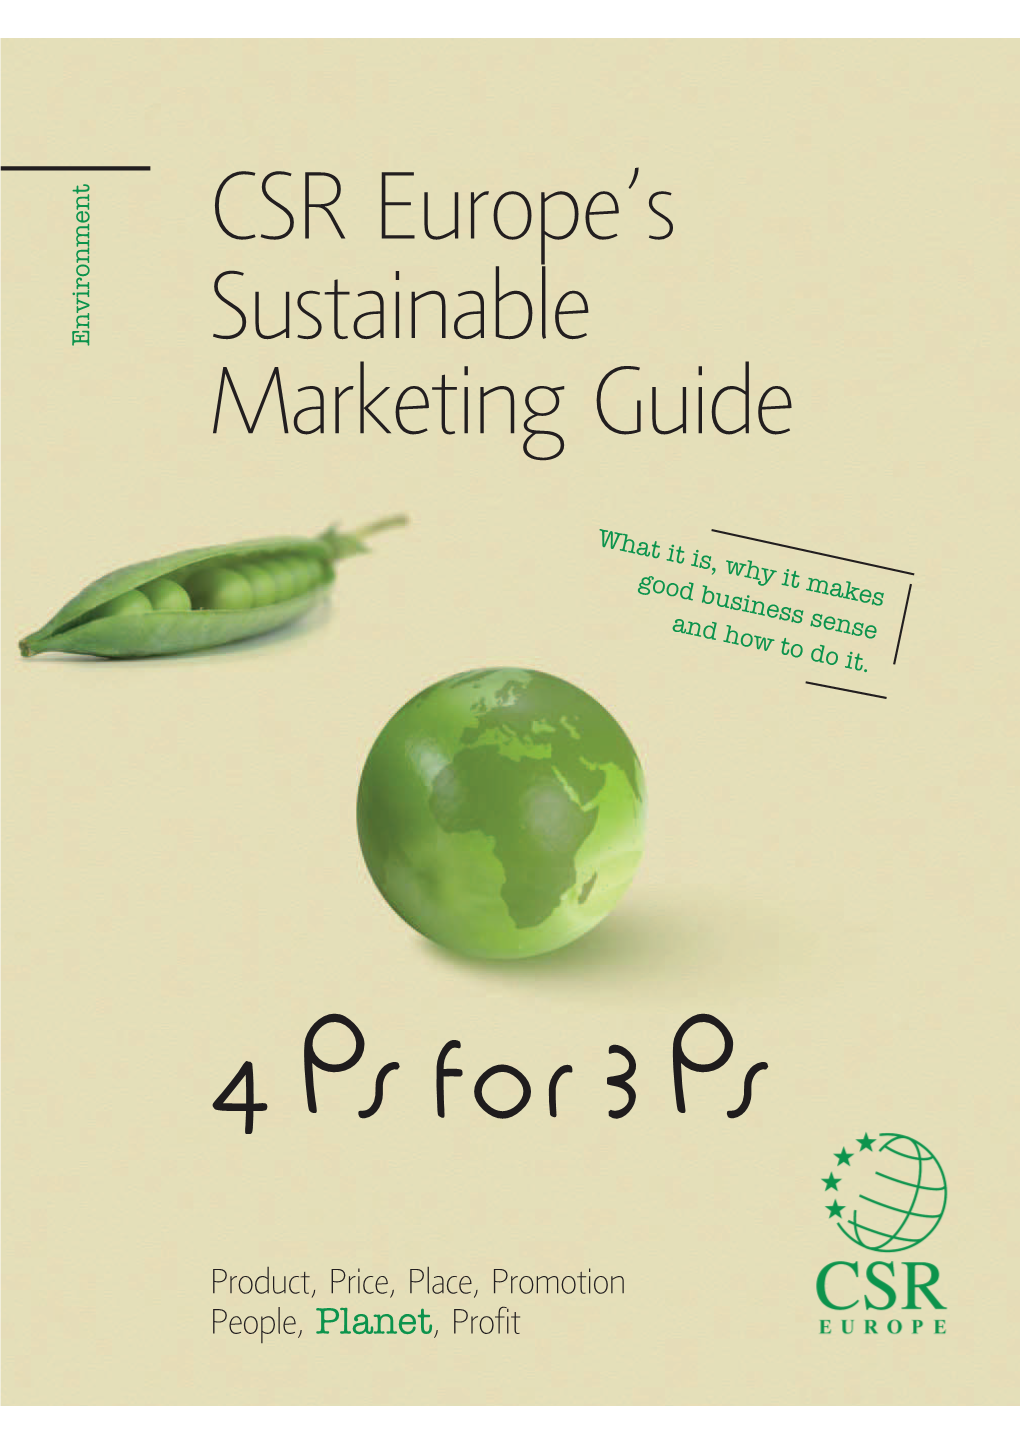 CSR Europe's Sustainable Marketing Guide